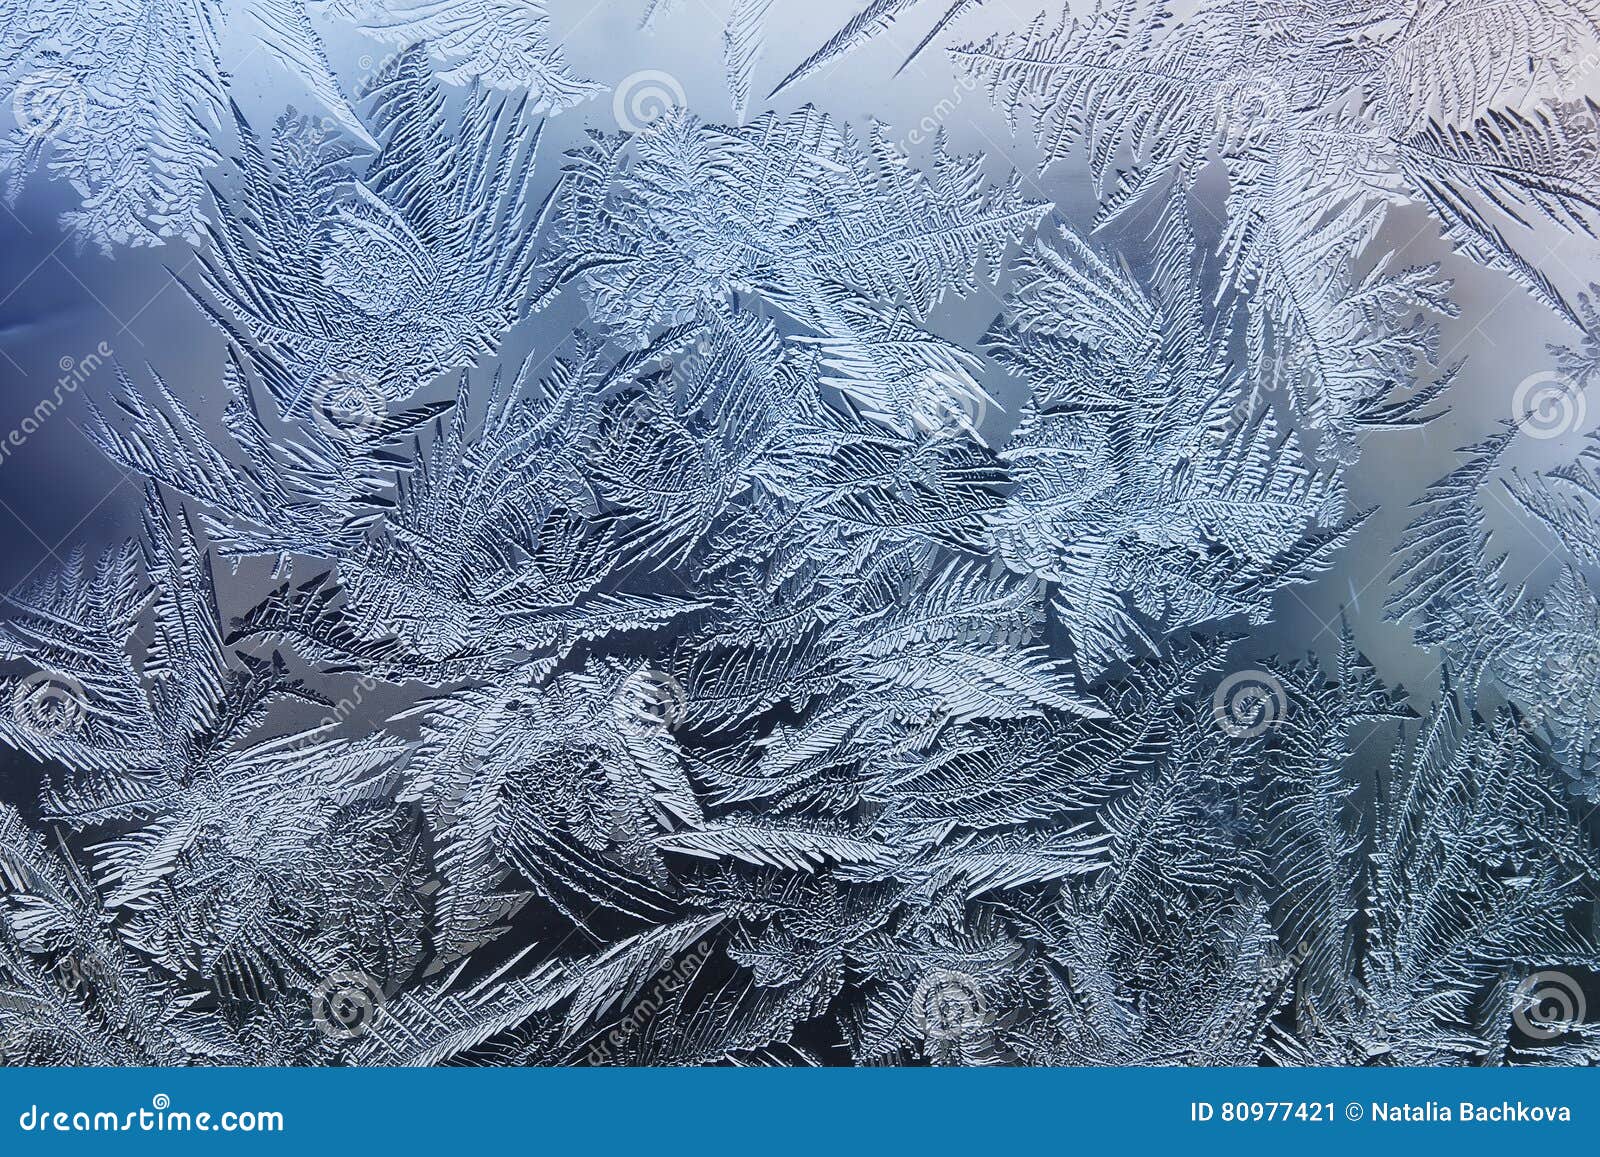 festive frosty pattern with white snowflakes on a blue background on glass